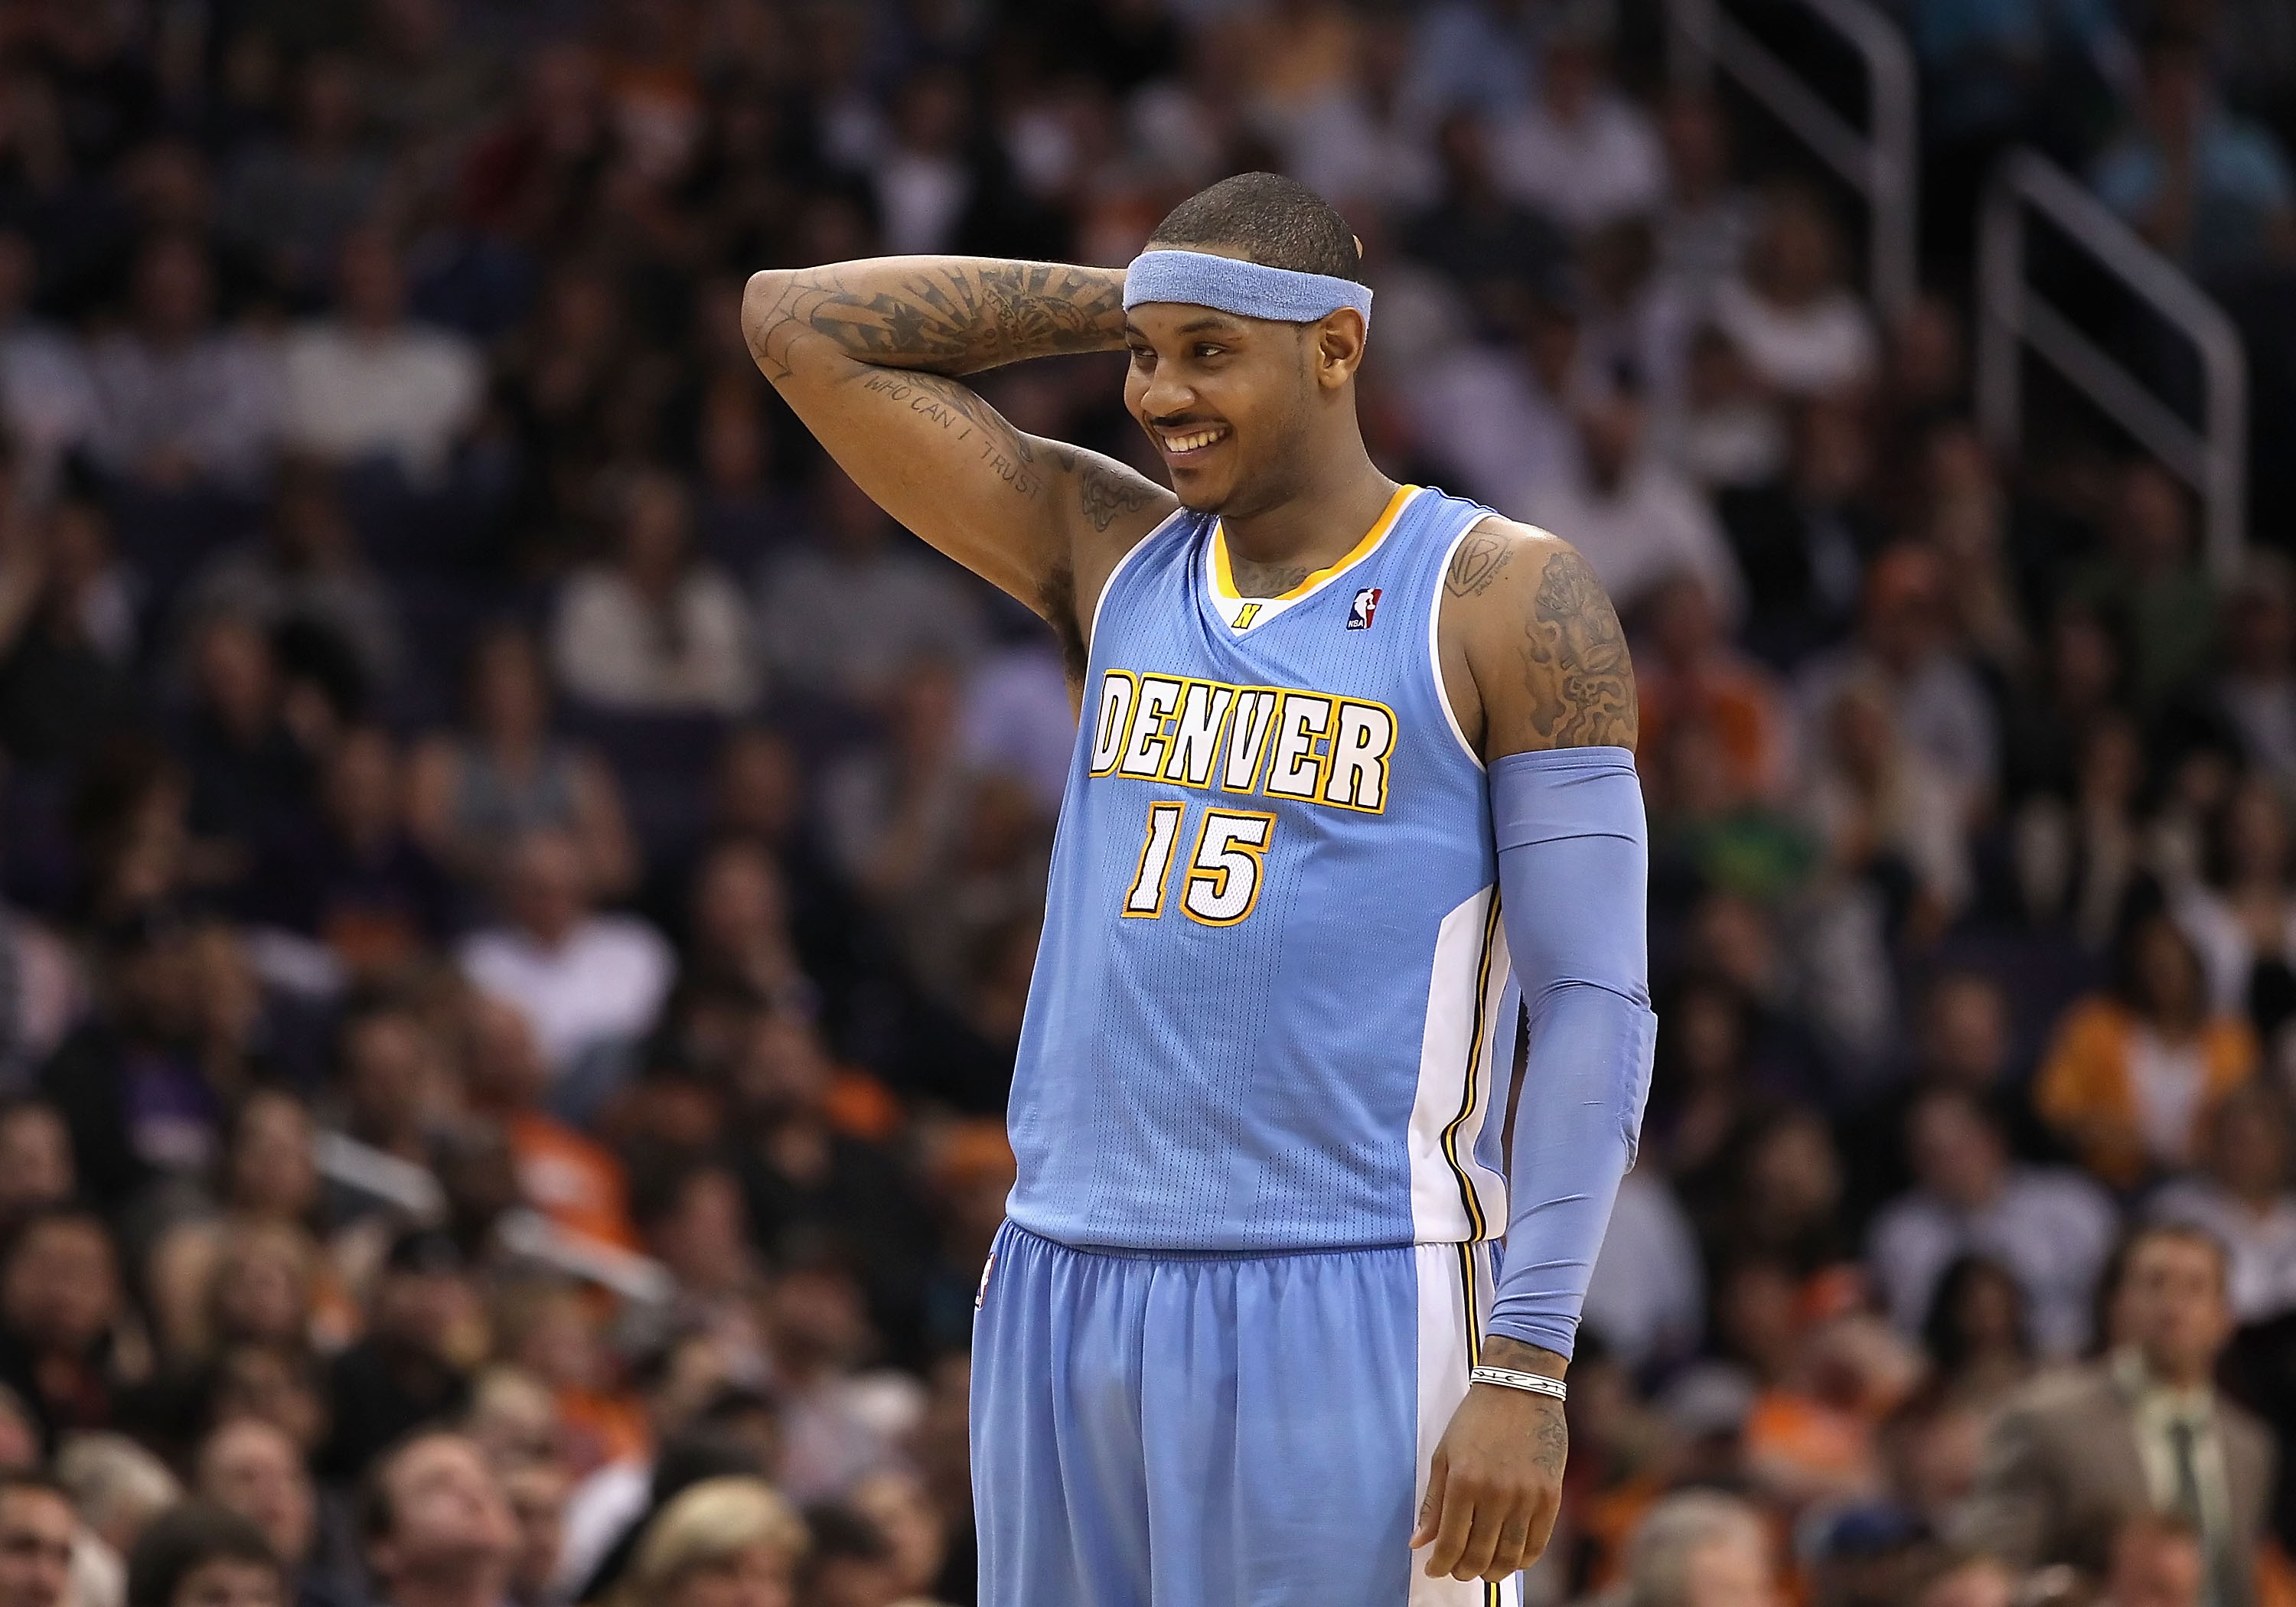 Carmelo Anthony of the Denver Nuggets stands on the court during